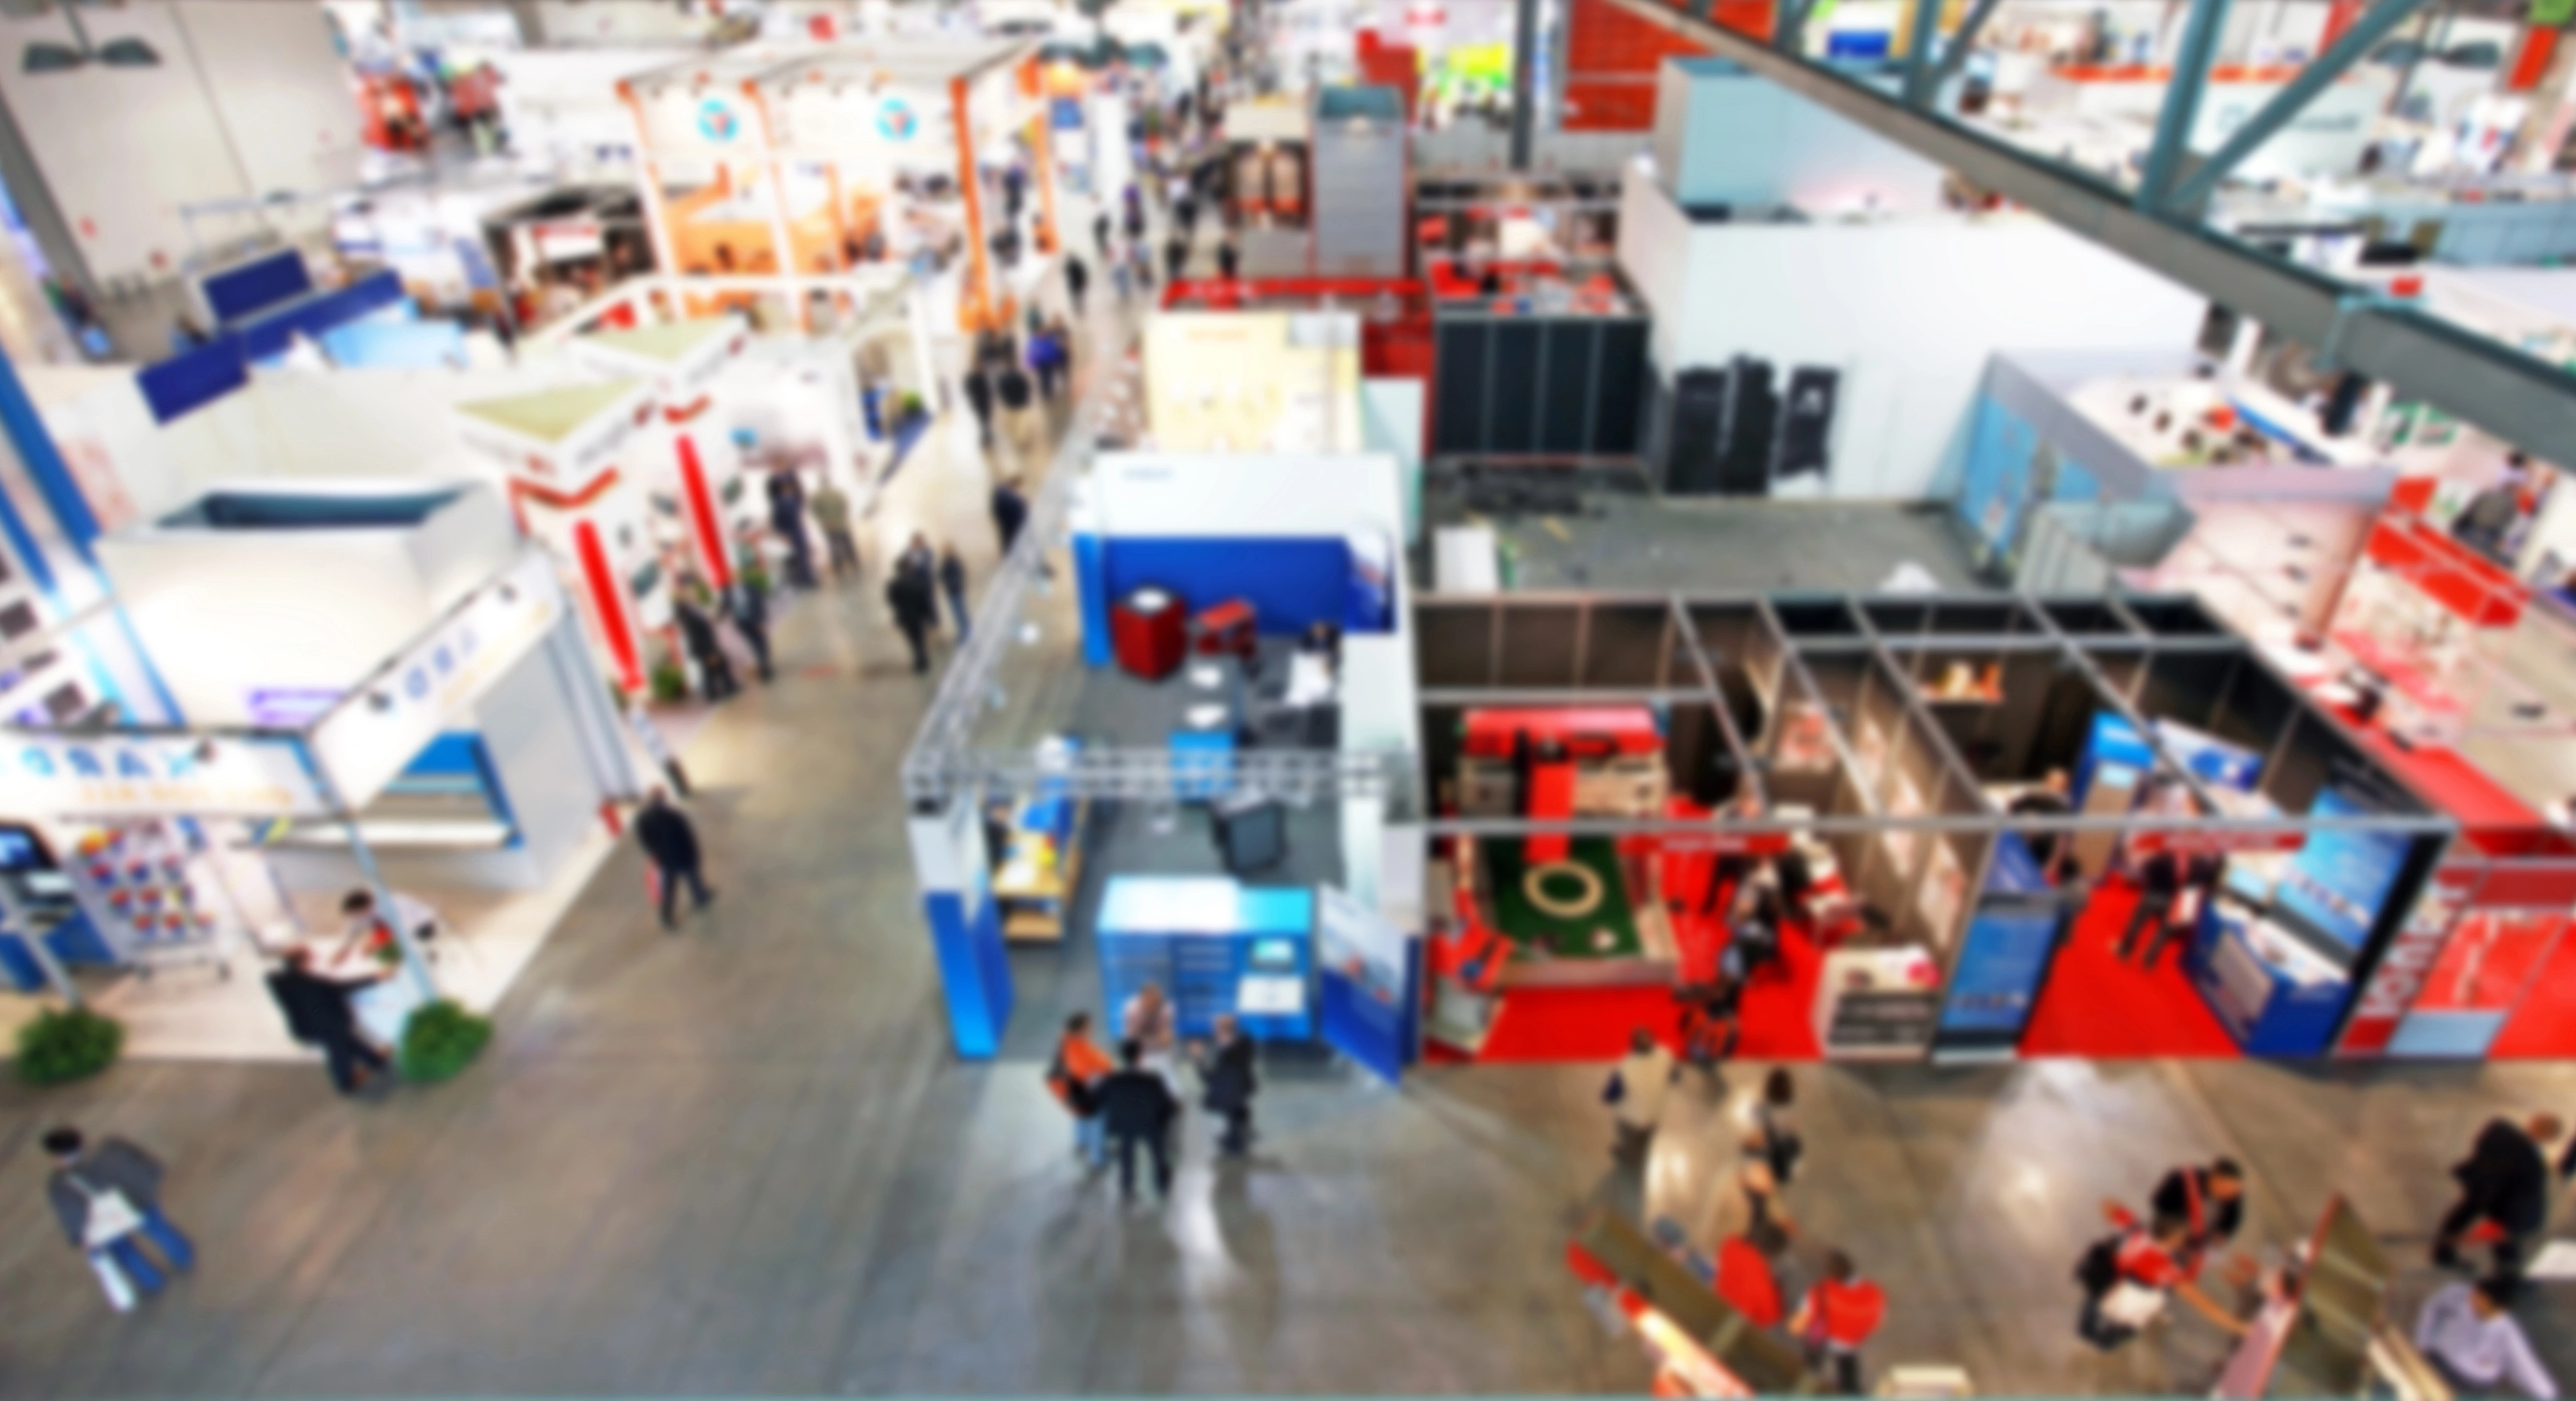 Aerial view of a tradeshow floor blurred intentionally